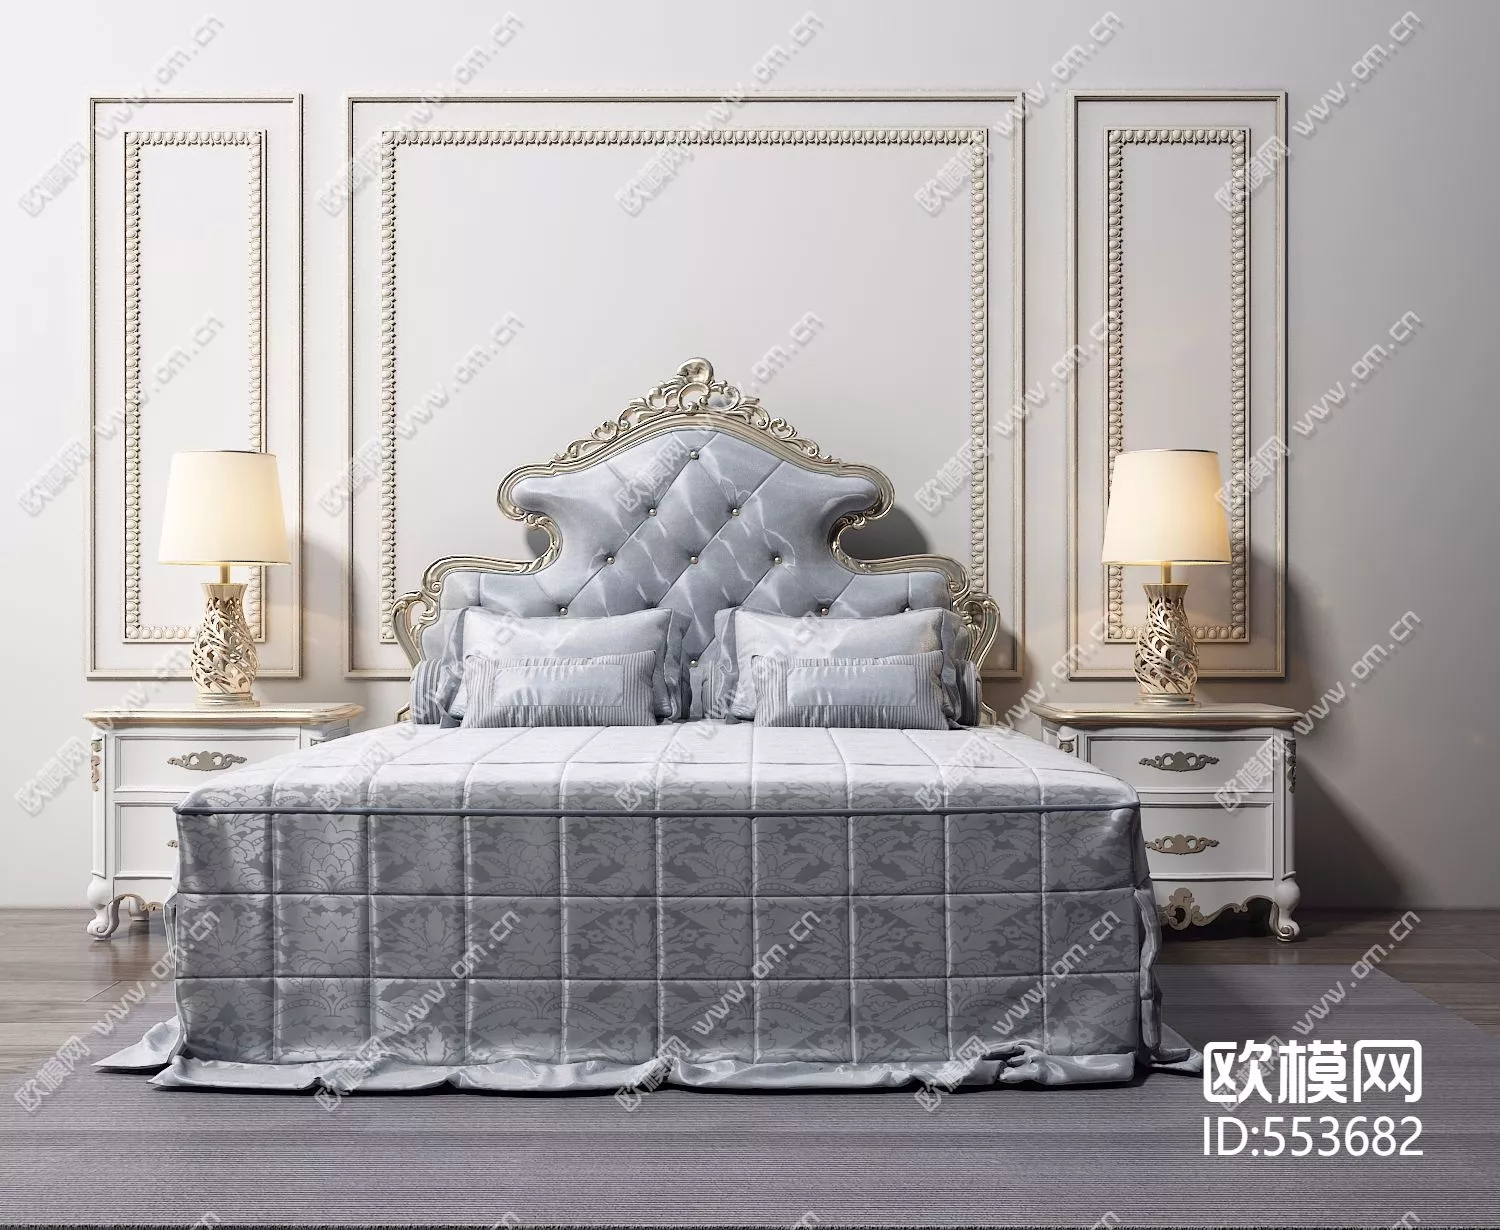 NEO CLASSIC BED - SKETCHUP 3D MODEL - VRAY OR ENSCAPE - ID16998